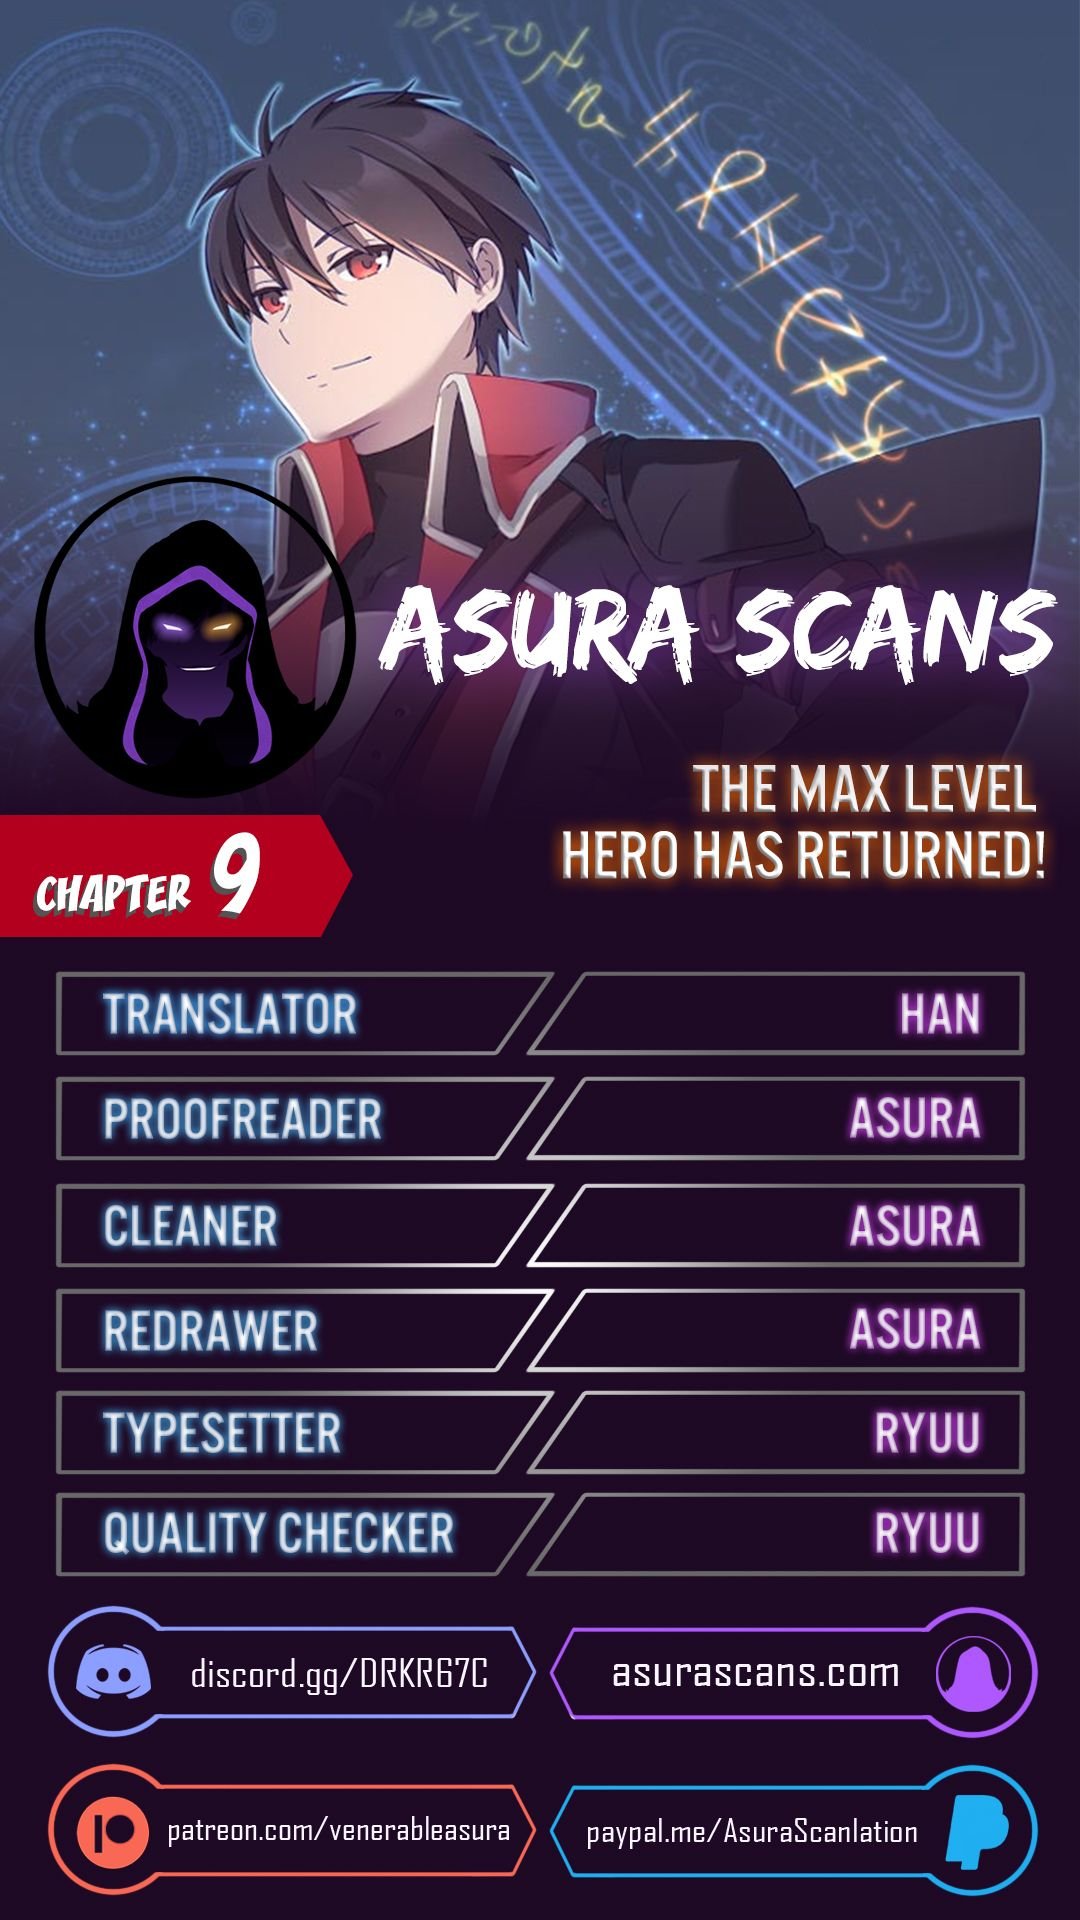 The MAX leveled hero will return! Chapter 9